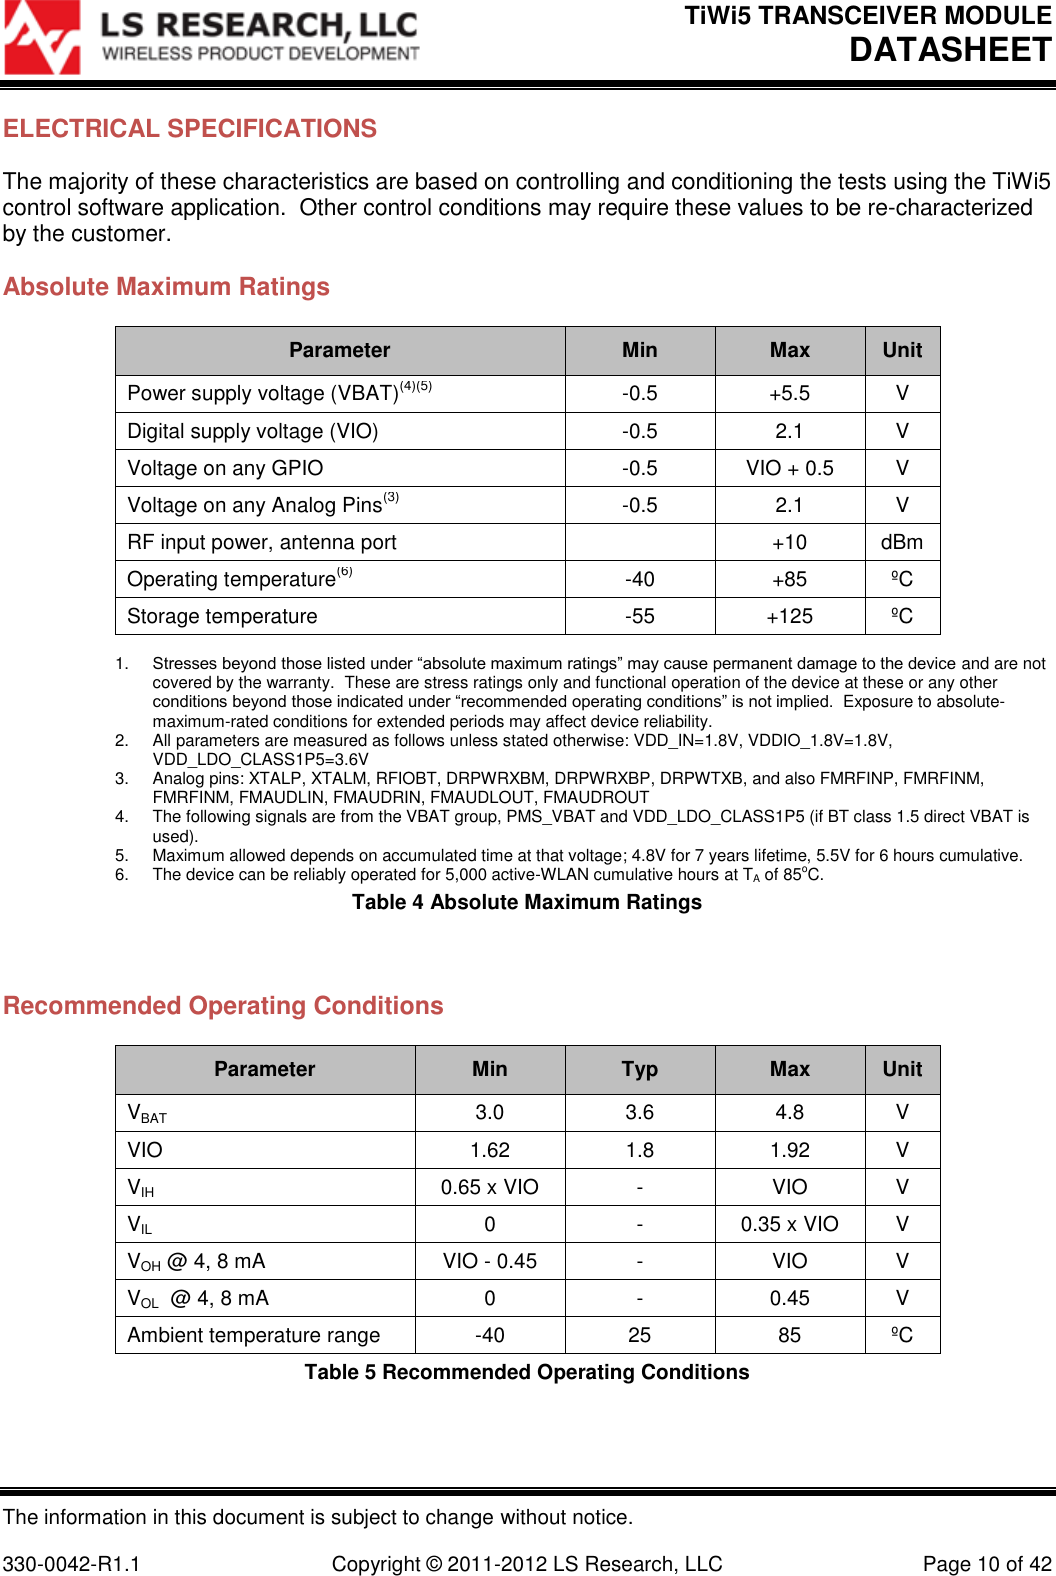 TiWi5 TRANSCEIVER MODULE DATASHEET  The information in this document is subject to change without notice.  330-0042-R1.1    Copyright © 2011-2012 LS Research, LLC  Page 10 of 42 ELECTRICAL SPECIFICATIONS The majority of these characteristics are based on controlling and conditioning the tests using the TiWi5 control software application.  Other control conditions may require these values to be re-characterized by the customer. Absolute Maximum Ratings Parameter Min Max Unit Power supply voltage (VBAT)(4)(5) -0.5 +5.5 V Digital supply voltage (VIO) -0.5 2.1 V Voltage on any GPIO -0.5 VIO + 0.5 V Voltage on any Analog Pins(3) -0.5 2.1 V RF input power, antenna port  +10 dBm Operating temperature(6) -40 +85 ºC Storage temperature -55 +125 ºC  1. Stresses beyond those listed under “absolute maximum ratings” may cause permanent damage to the device and are not covered by the warranty.  These are stress ratings only and functional operation of the device at these or any other conditions beyond those indicated under “recommended operating conditions” is not implied.  Exposure to absolute-maximum-rated conditions for extended periods may affect device reliability. 2.  All parameters are measured as follows unless stated otherwise: VDD_IN=1.8V, VDDIO_1.8V=1.8V, VDD_LDO_CLASS1P5=3.6V 3.  Analog pins: XTALP, XTALM, RFIOBT, DRPWRXBM, DRPWRXBP, DRPWTXB, and also FMRFINP, FMRFINM, FMRFINM, FMAUDLIN, FMAUDRIN, FMAUDLOUT, FMAUDROUT 4.  The following signals are from the VBAT group, PMS_VBAT and VDD_LDO_CLASS1P5 (if BT class 1.5 direct VBAT is used). 5.  Maximum allowed depends on accumulated time at that voltage; 4.8V for 7 years lifetime, 5.5V for 6 hours cumulative. 6.  The device can be reliably operated for 5,000 active-WLAN cumulative hours at TA of 85oC. Table 4 Absolute Maximum Ratings  Recommended Operating Conditions Parameter Min Typ Max Unit VBAT 3.0 3.6 4.8 V VIO 1.62 1.8 1.92 V VIH  0.65 x VIO - VIO V VIL 0 - 0.35 x VIO V VOH @ 4, 8 mA VIO - 0.45 - VIO V VOL  @ 4, 8 mA 0 - 0.45 V Ambient temperature range -40 25 85 ºC Table 5 Recommended Operating Conditions 